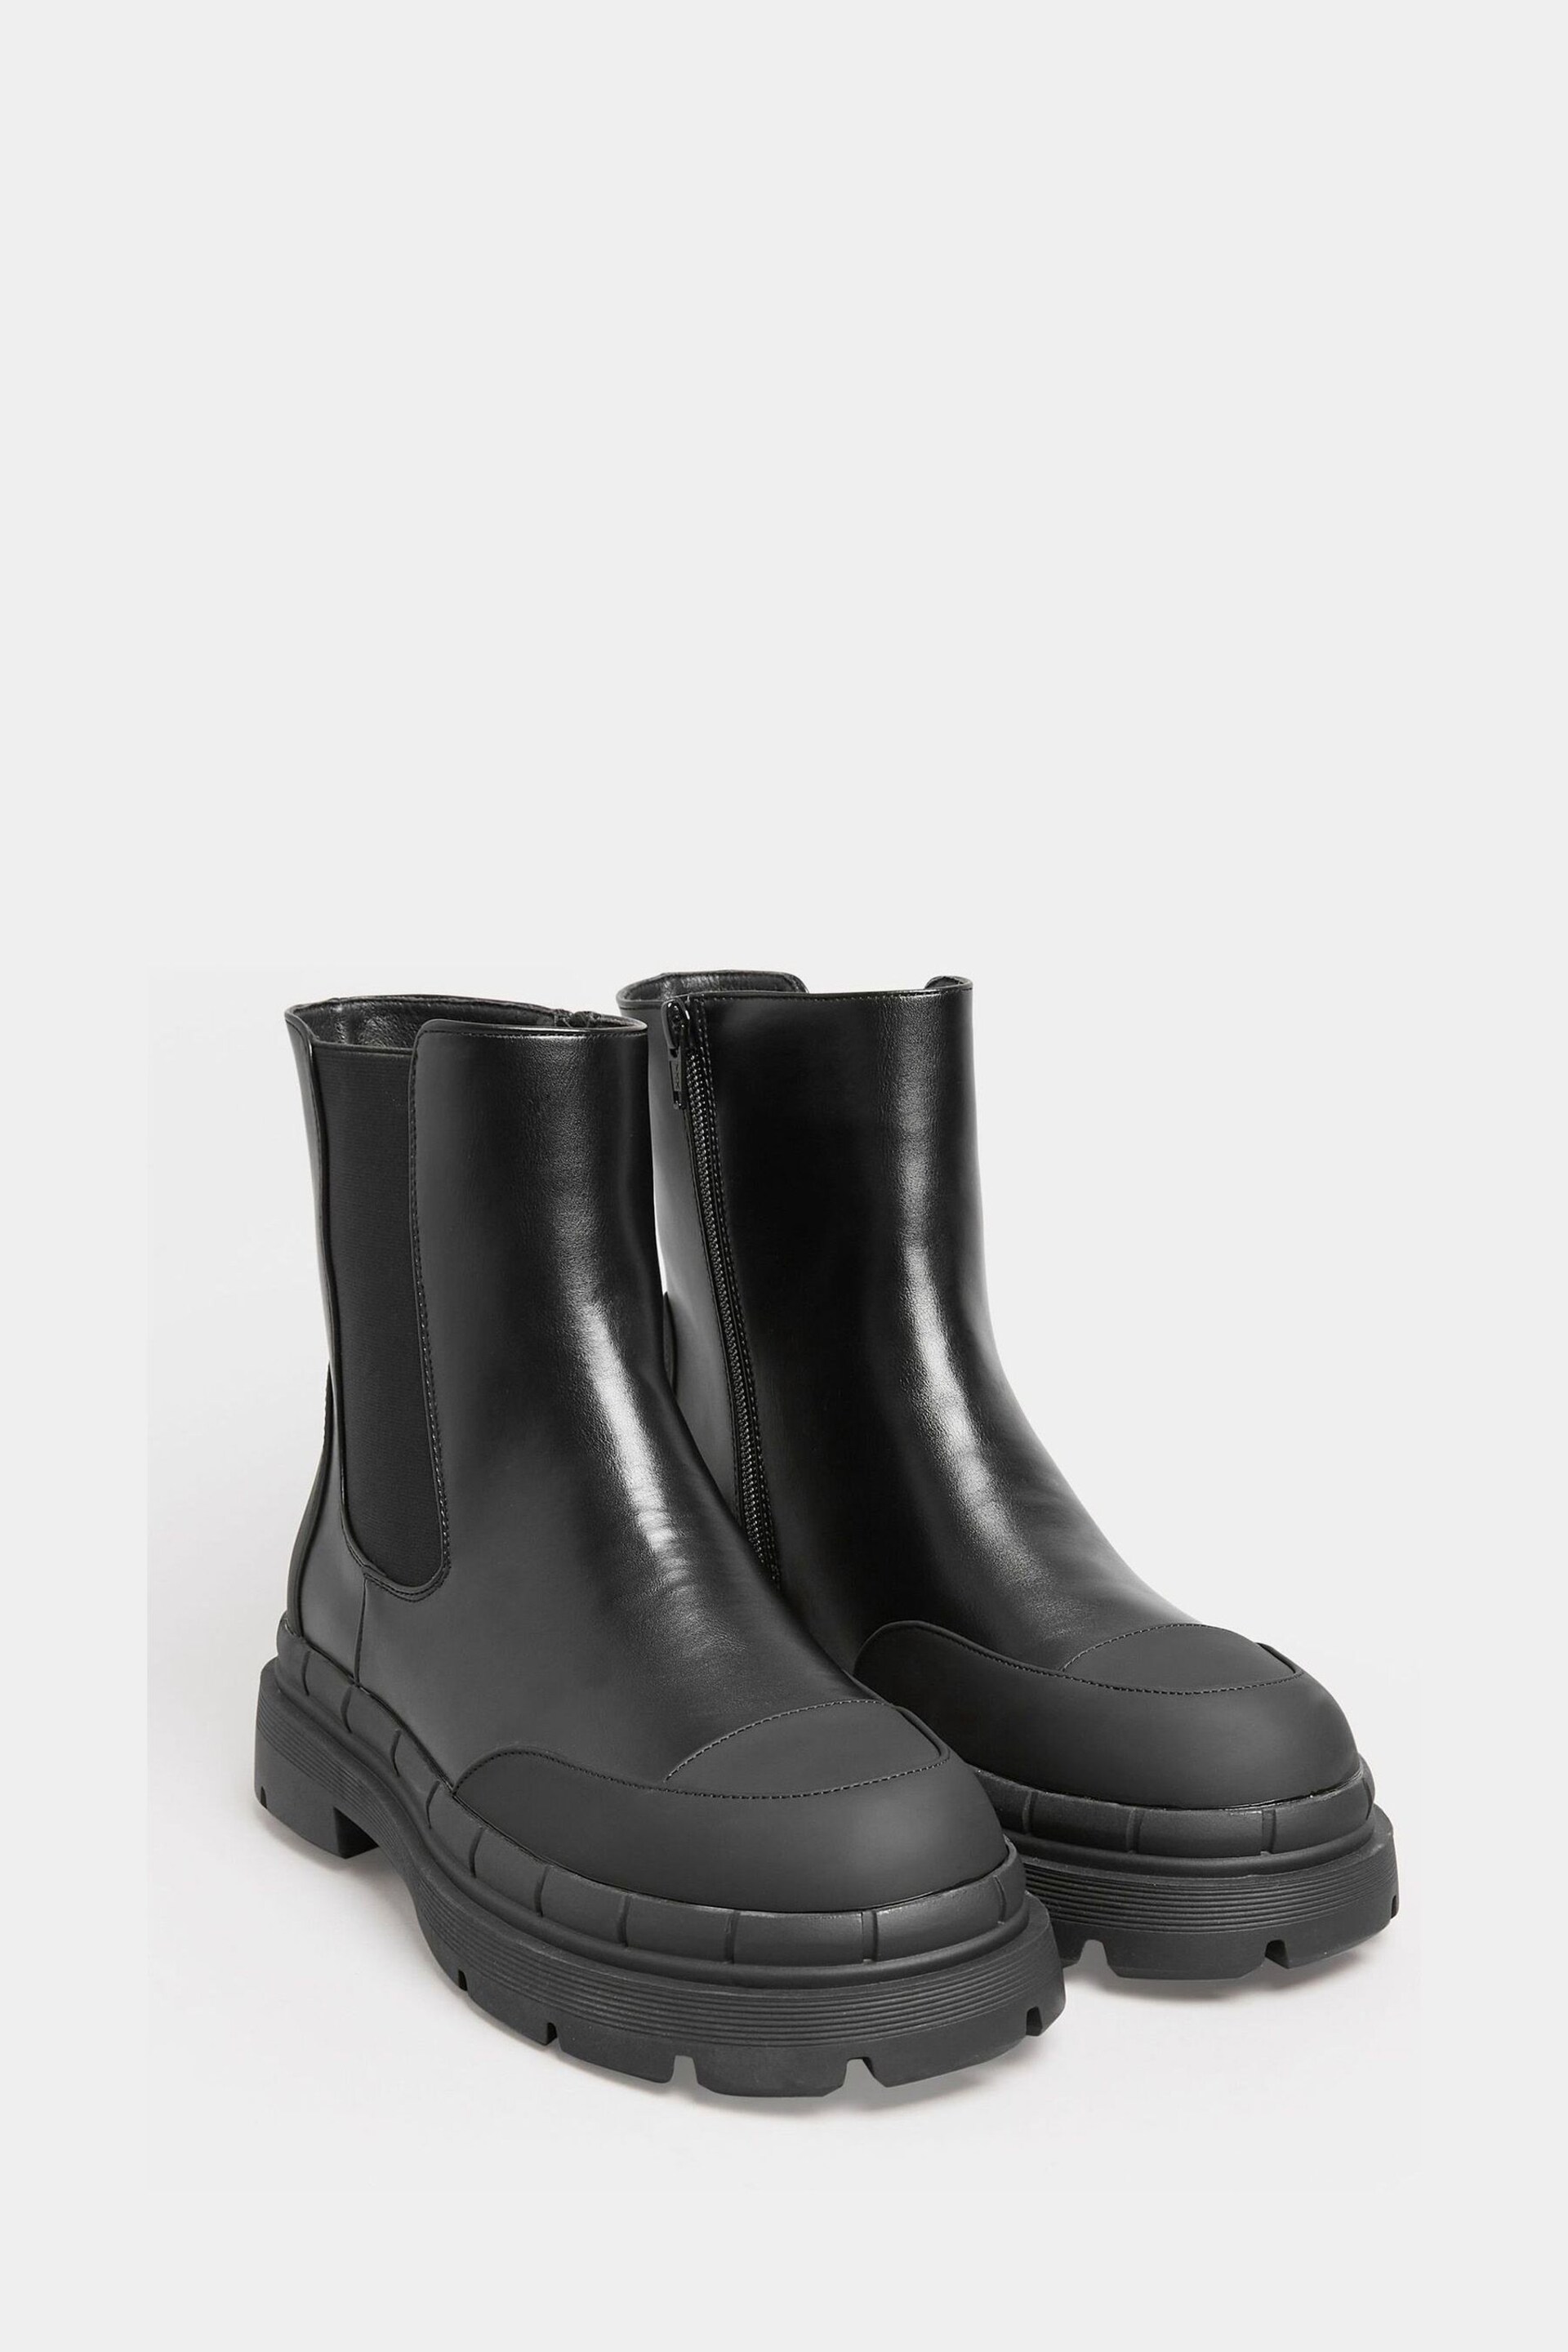 Yours Curve Black Extra Wide Fit High Shaft Chelsea Boot - Image 2 of 5